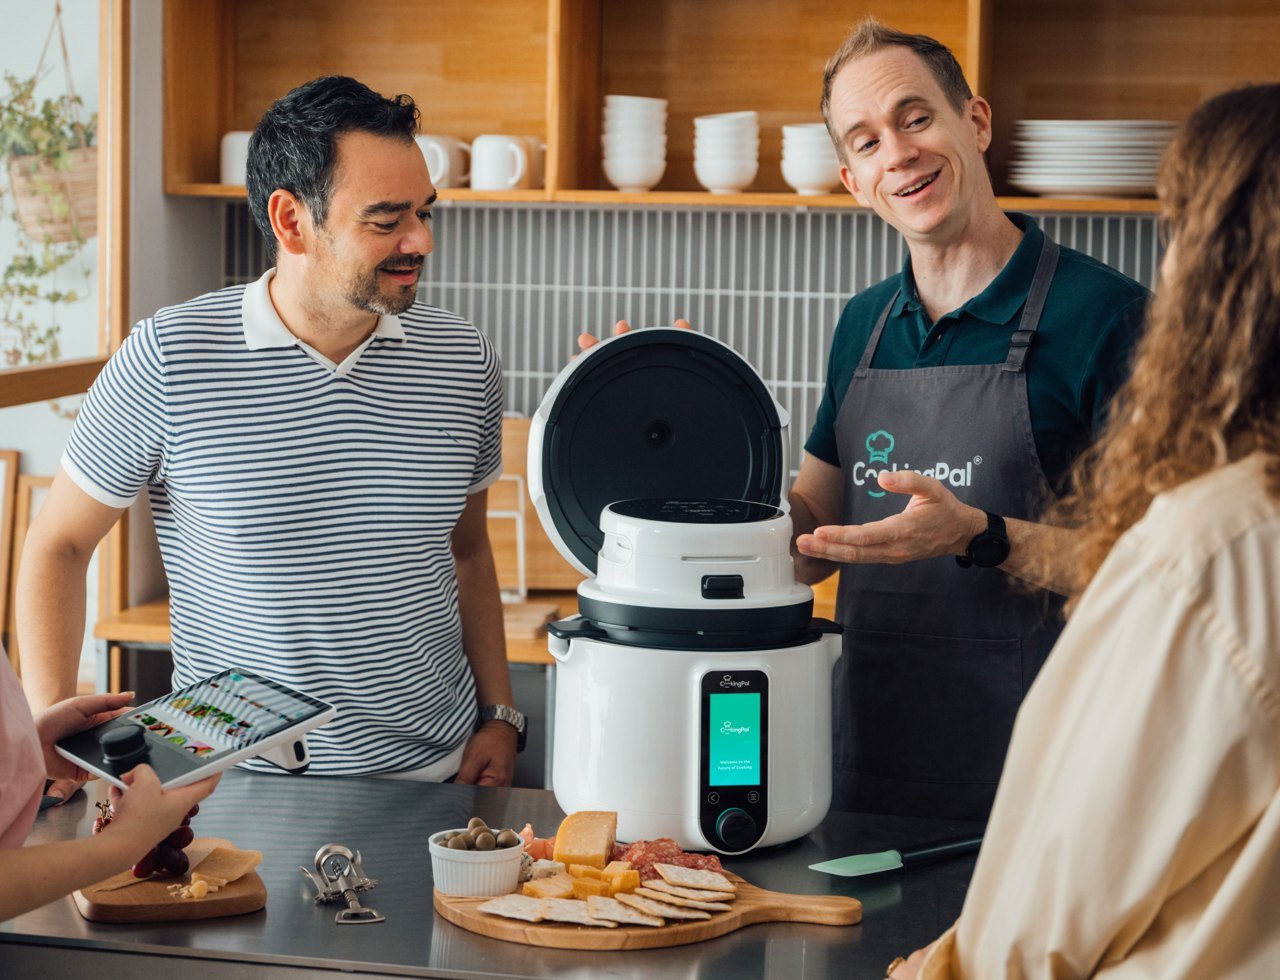 https://www.yankodesign.com/images/design_news/2023/04/this-multifunctional-smart-cooker-turns-you-into-a-kitchen-wiz-with-ease/kitchen_appliance_that_is_a_pressure_cooker_saucepan_and_air-fryer_2.jpg